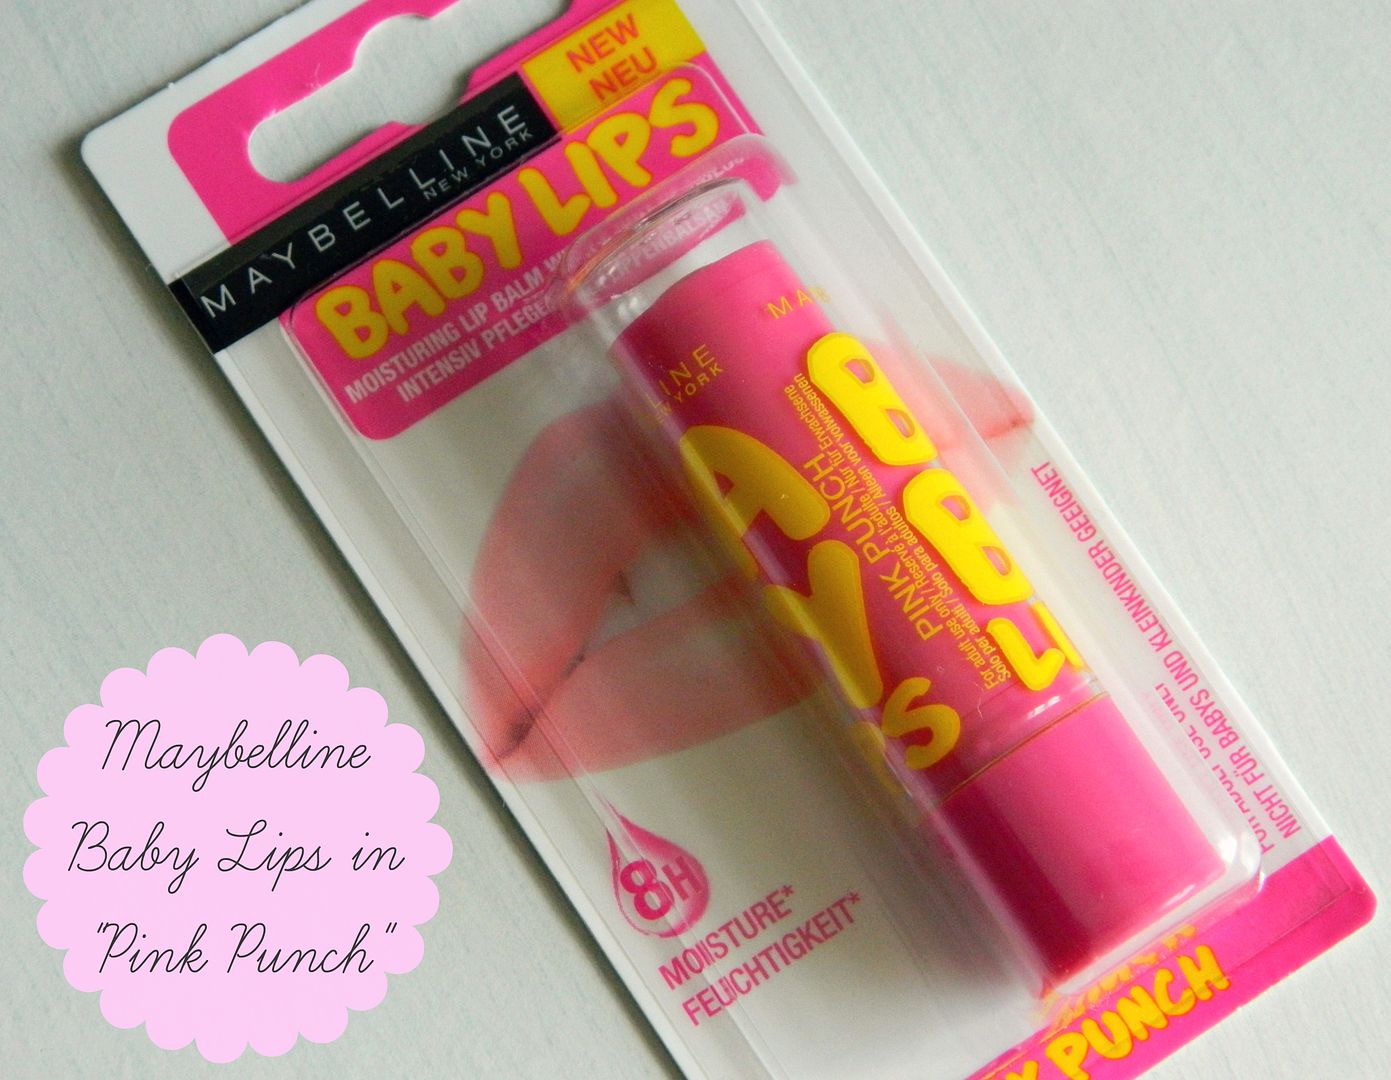 Maybelline baby Lips Pink Punch Review Packaging Belle-amie UK Beauty Fashion Lifestyle Blog